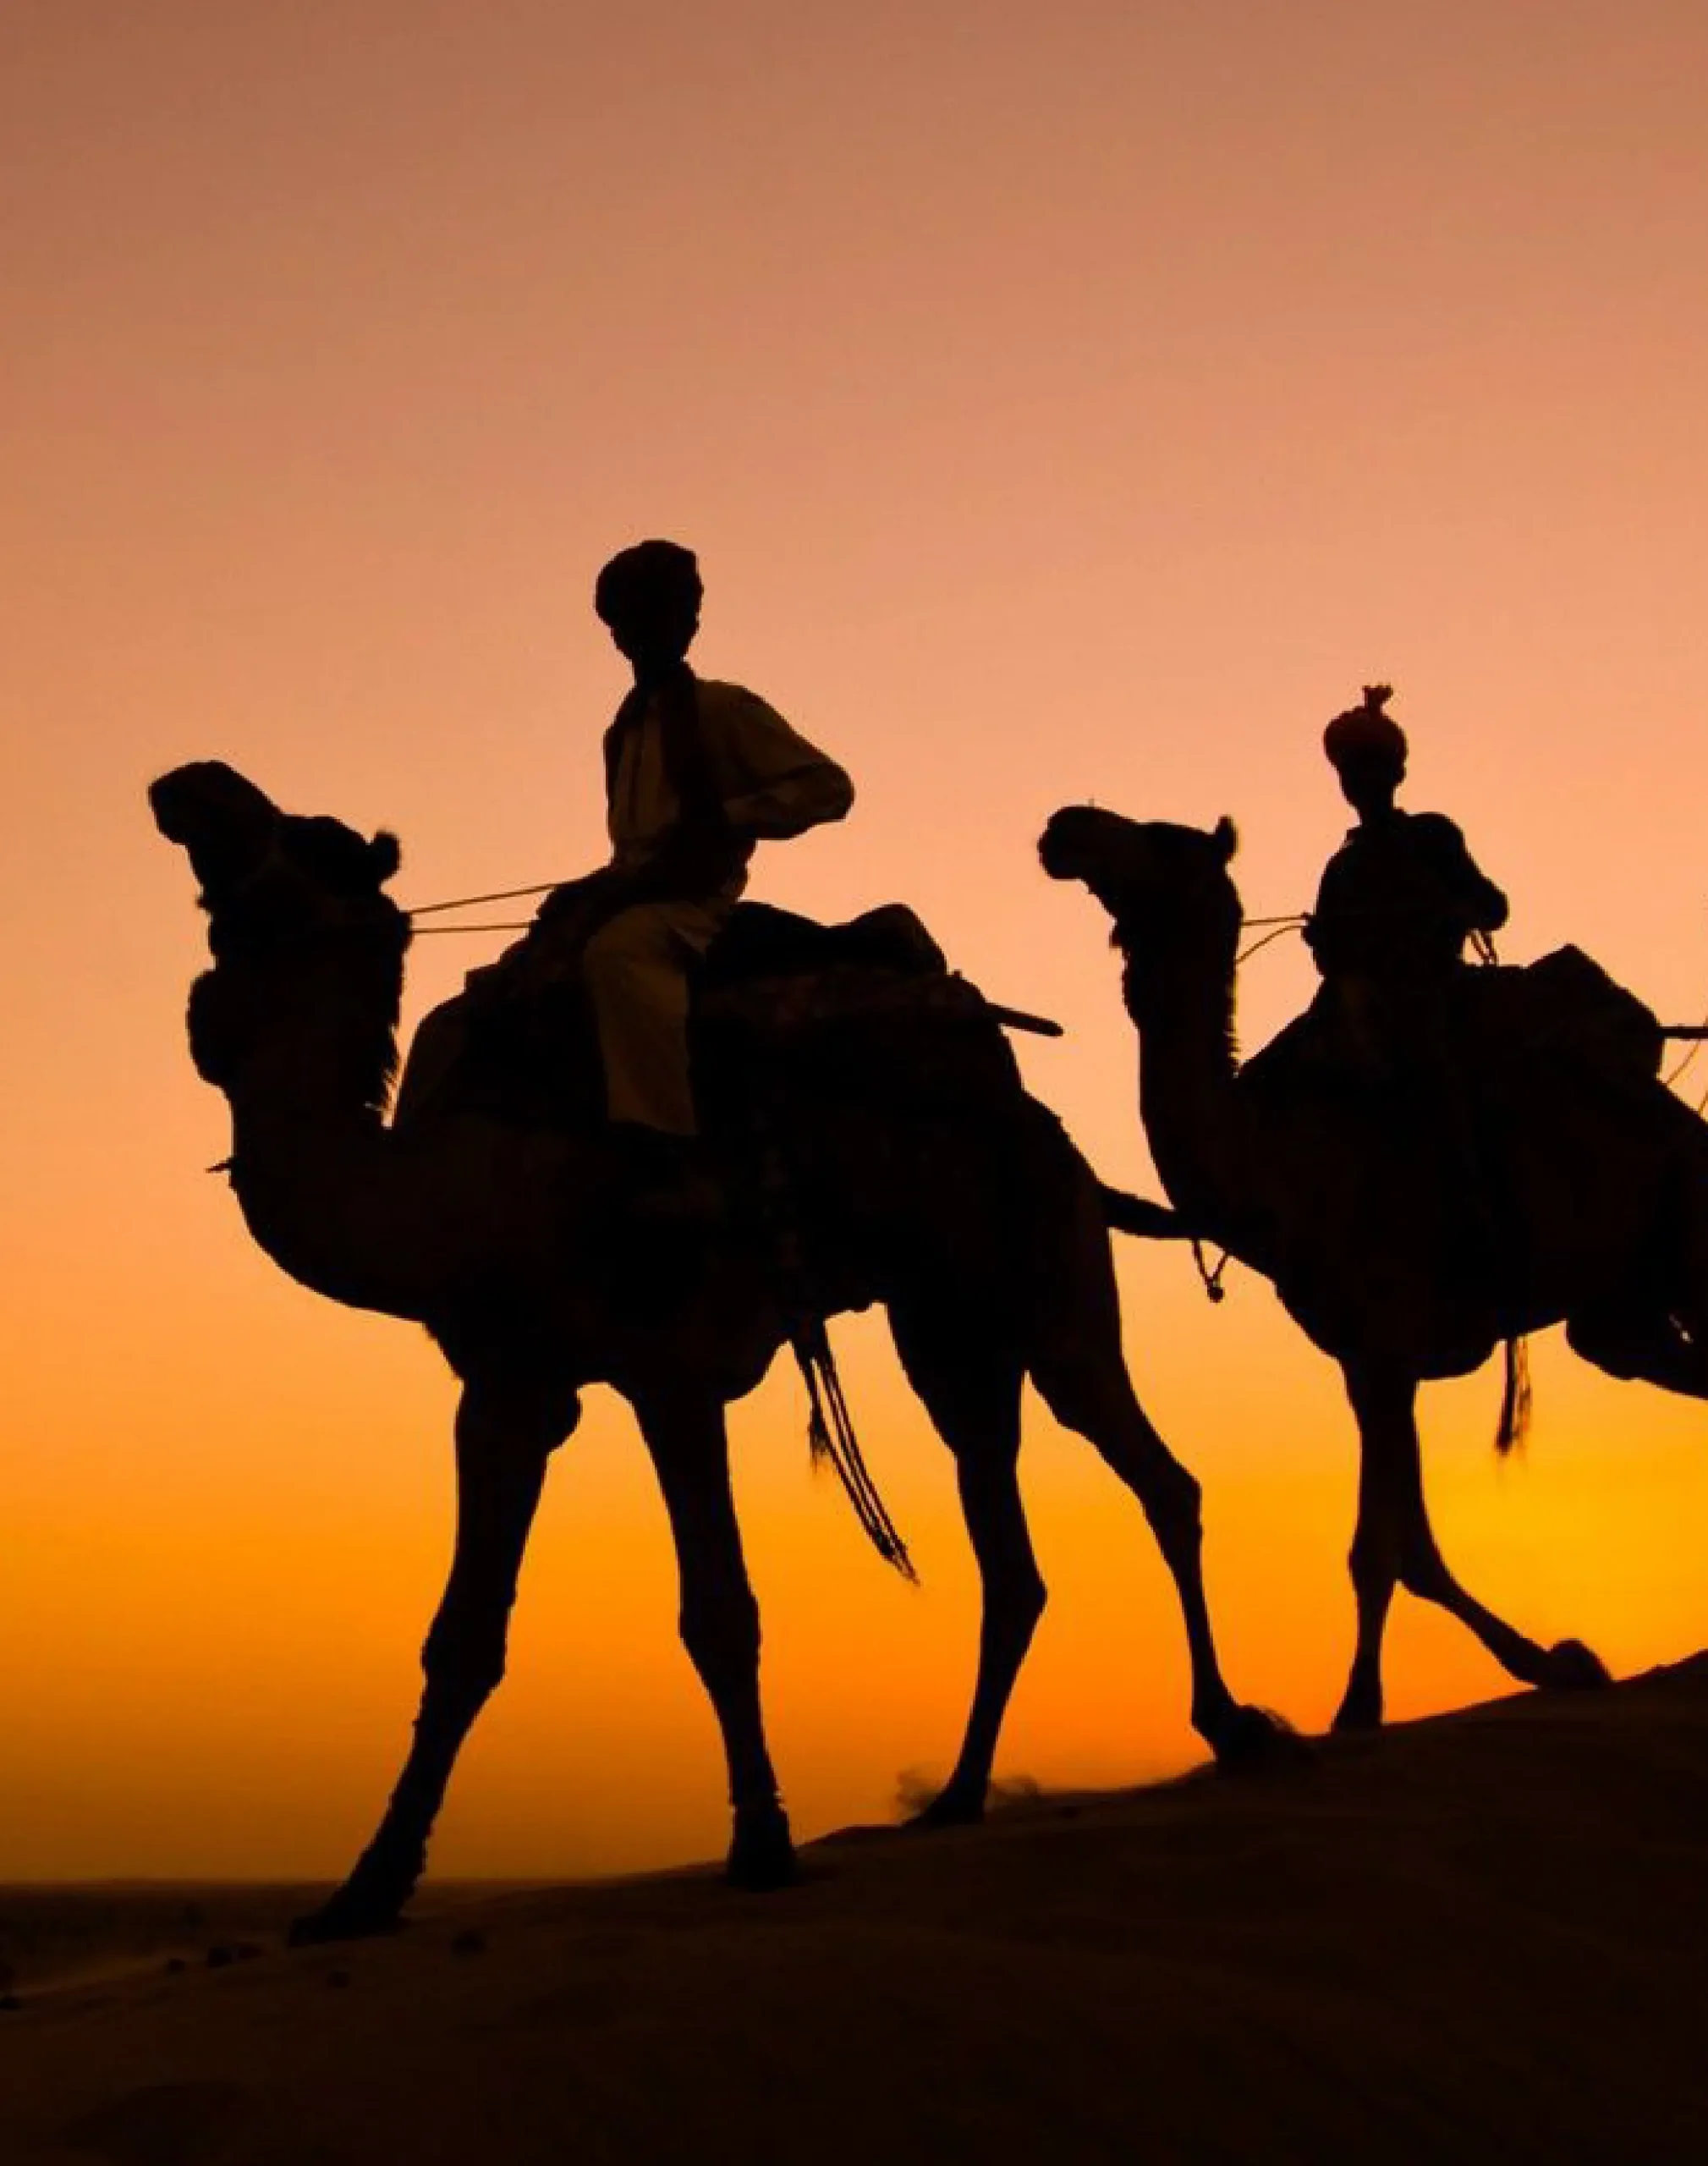 11 days rajasthan tour packages